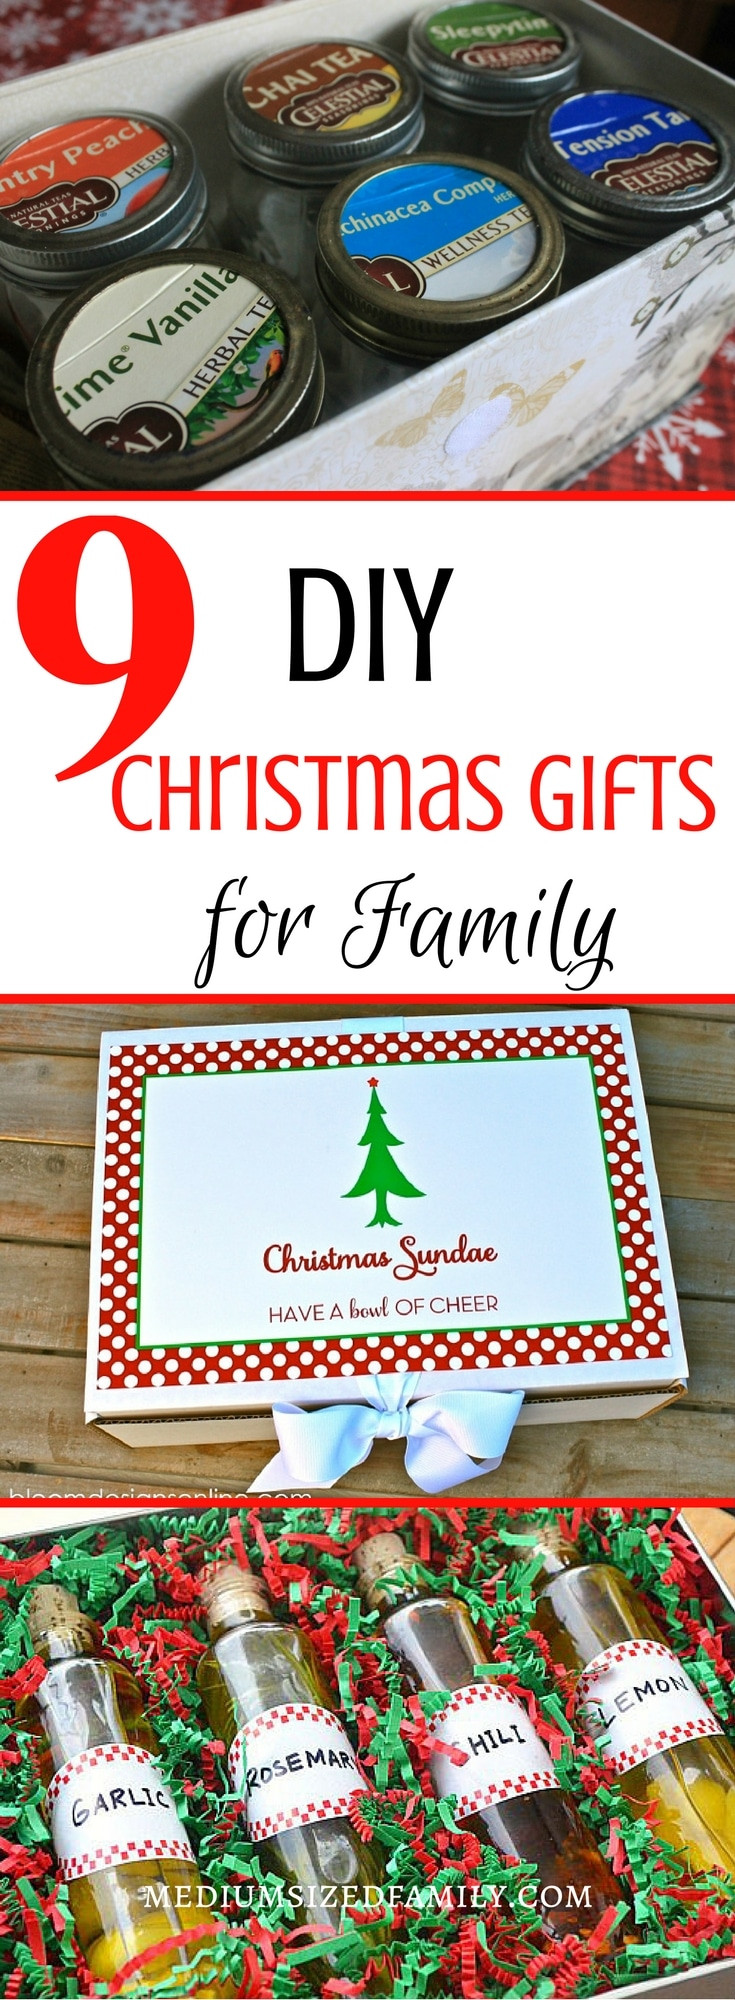 DIY Money Gift Ideas
 7 Ways to Pile Up Christmas Money Do It Yourself